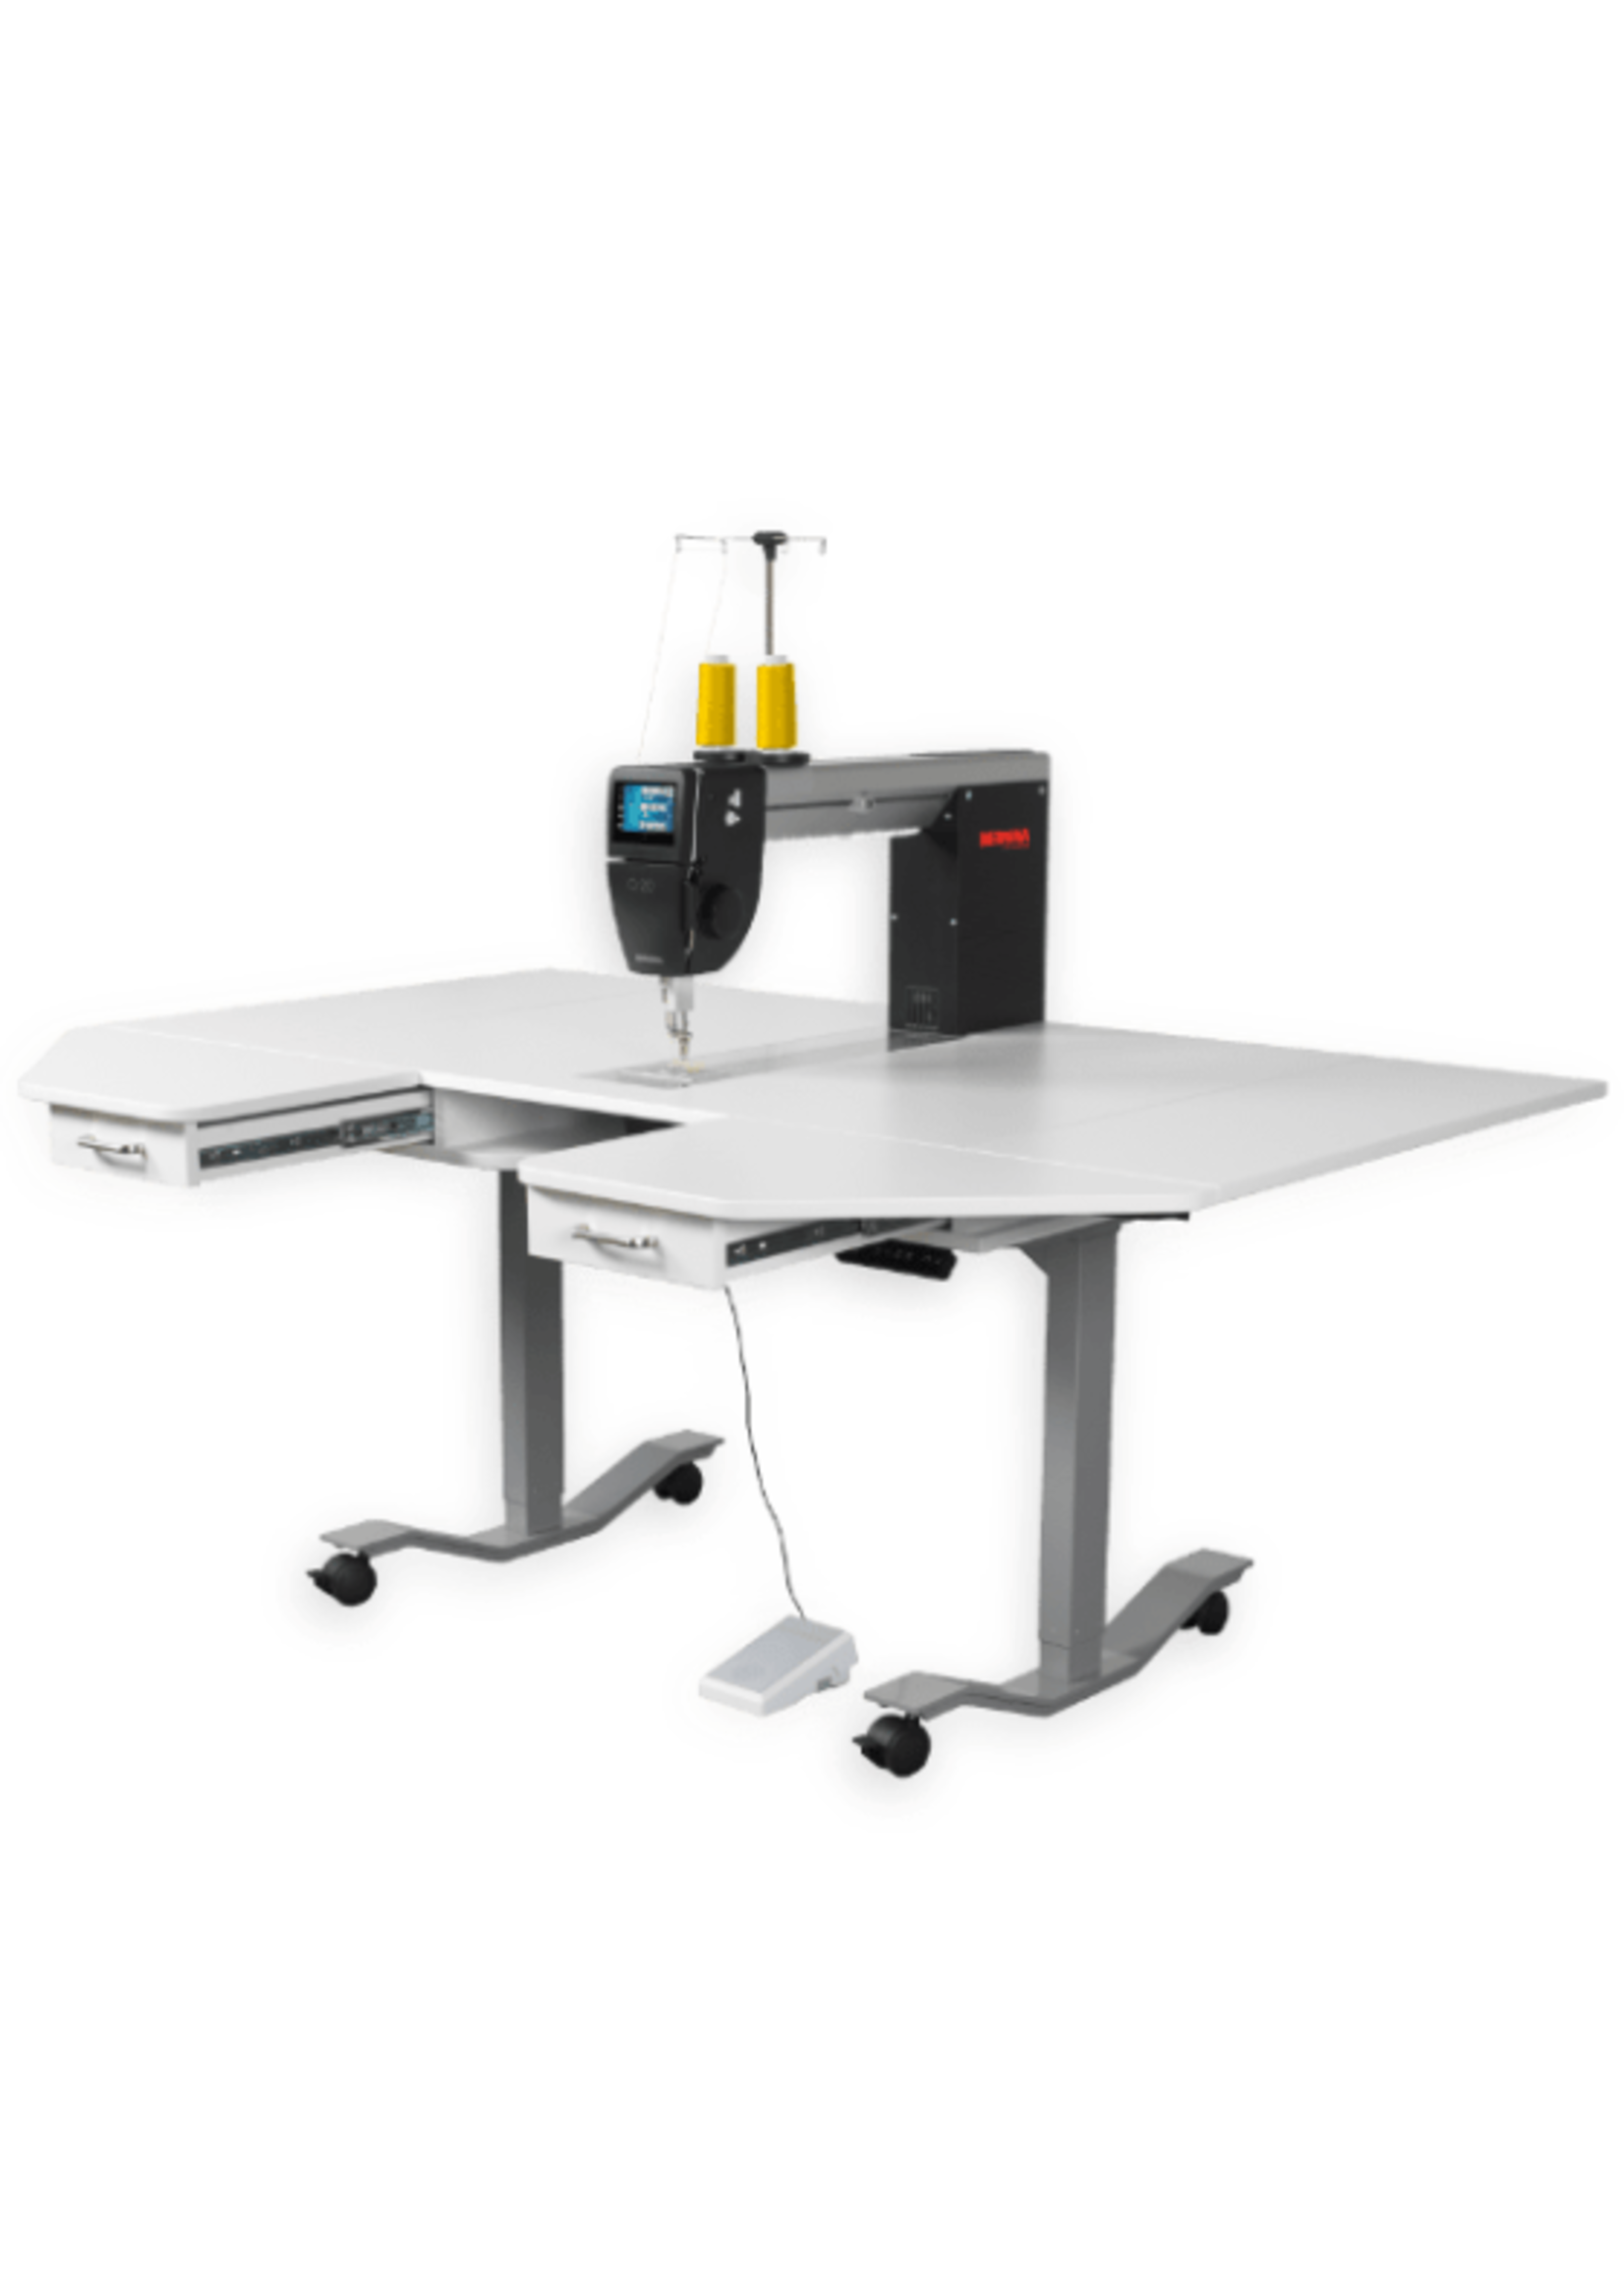 Bernina Bernina Q20 sit down with Horn Lift Table Bundle - AVAILABLE FOR IN-STORE PURCHASE ONLY